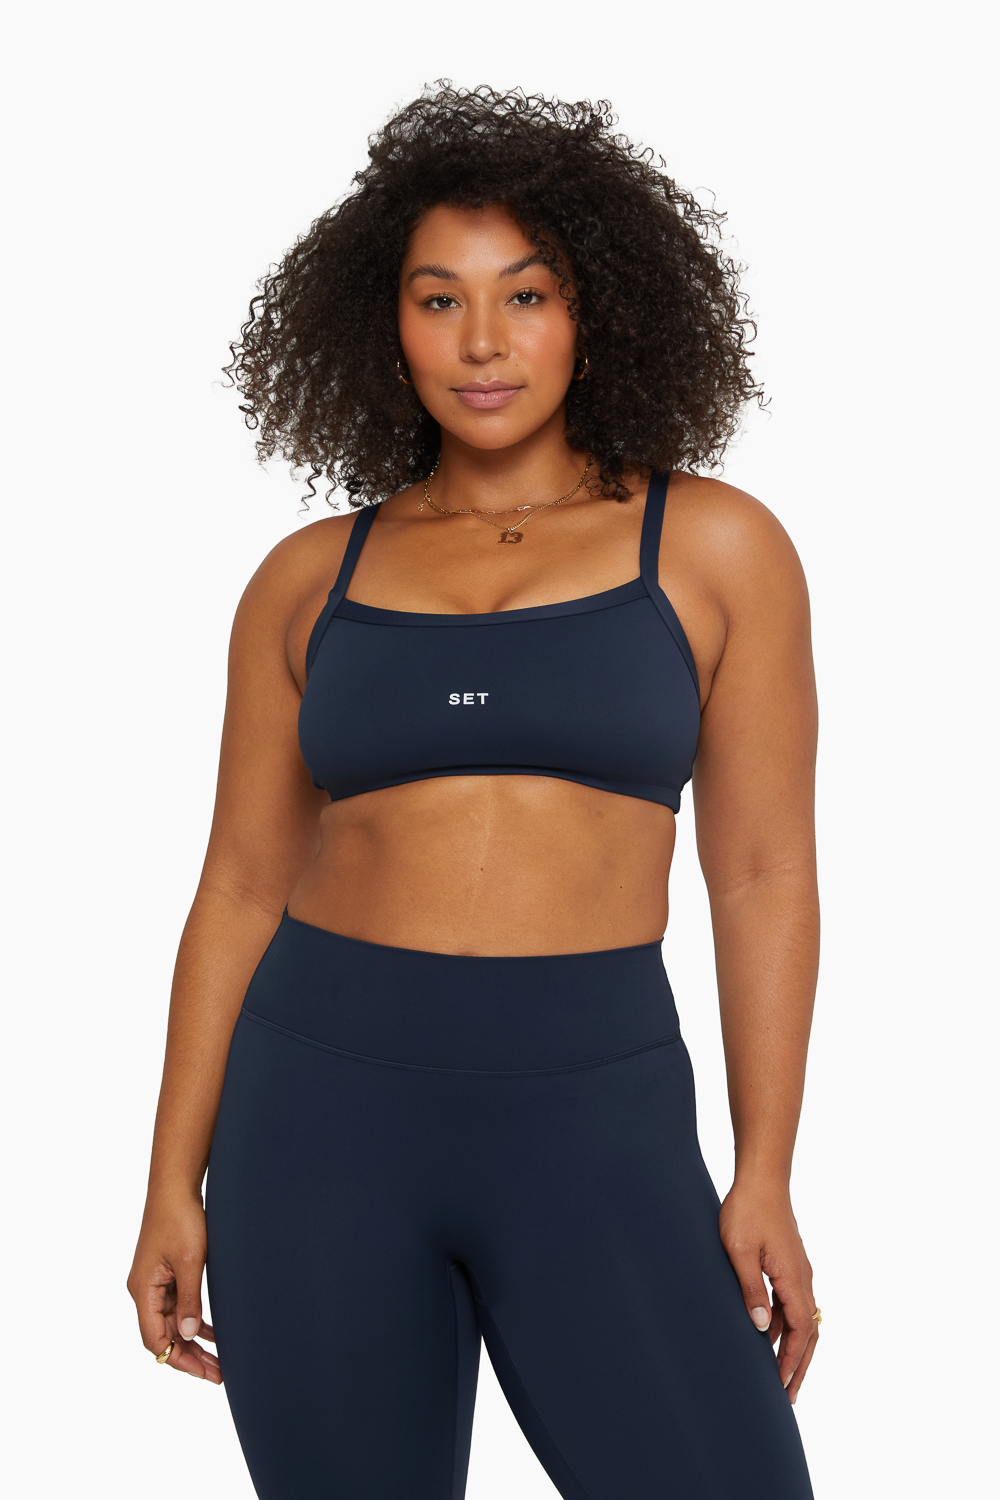 Sports Bras Are Taking Over Women's Lingerie Collections